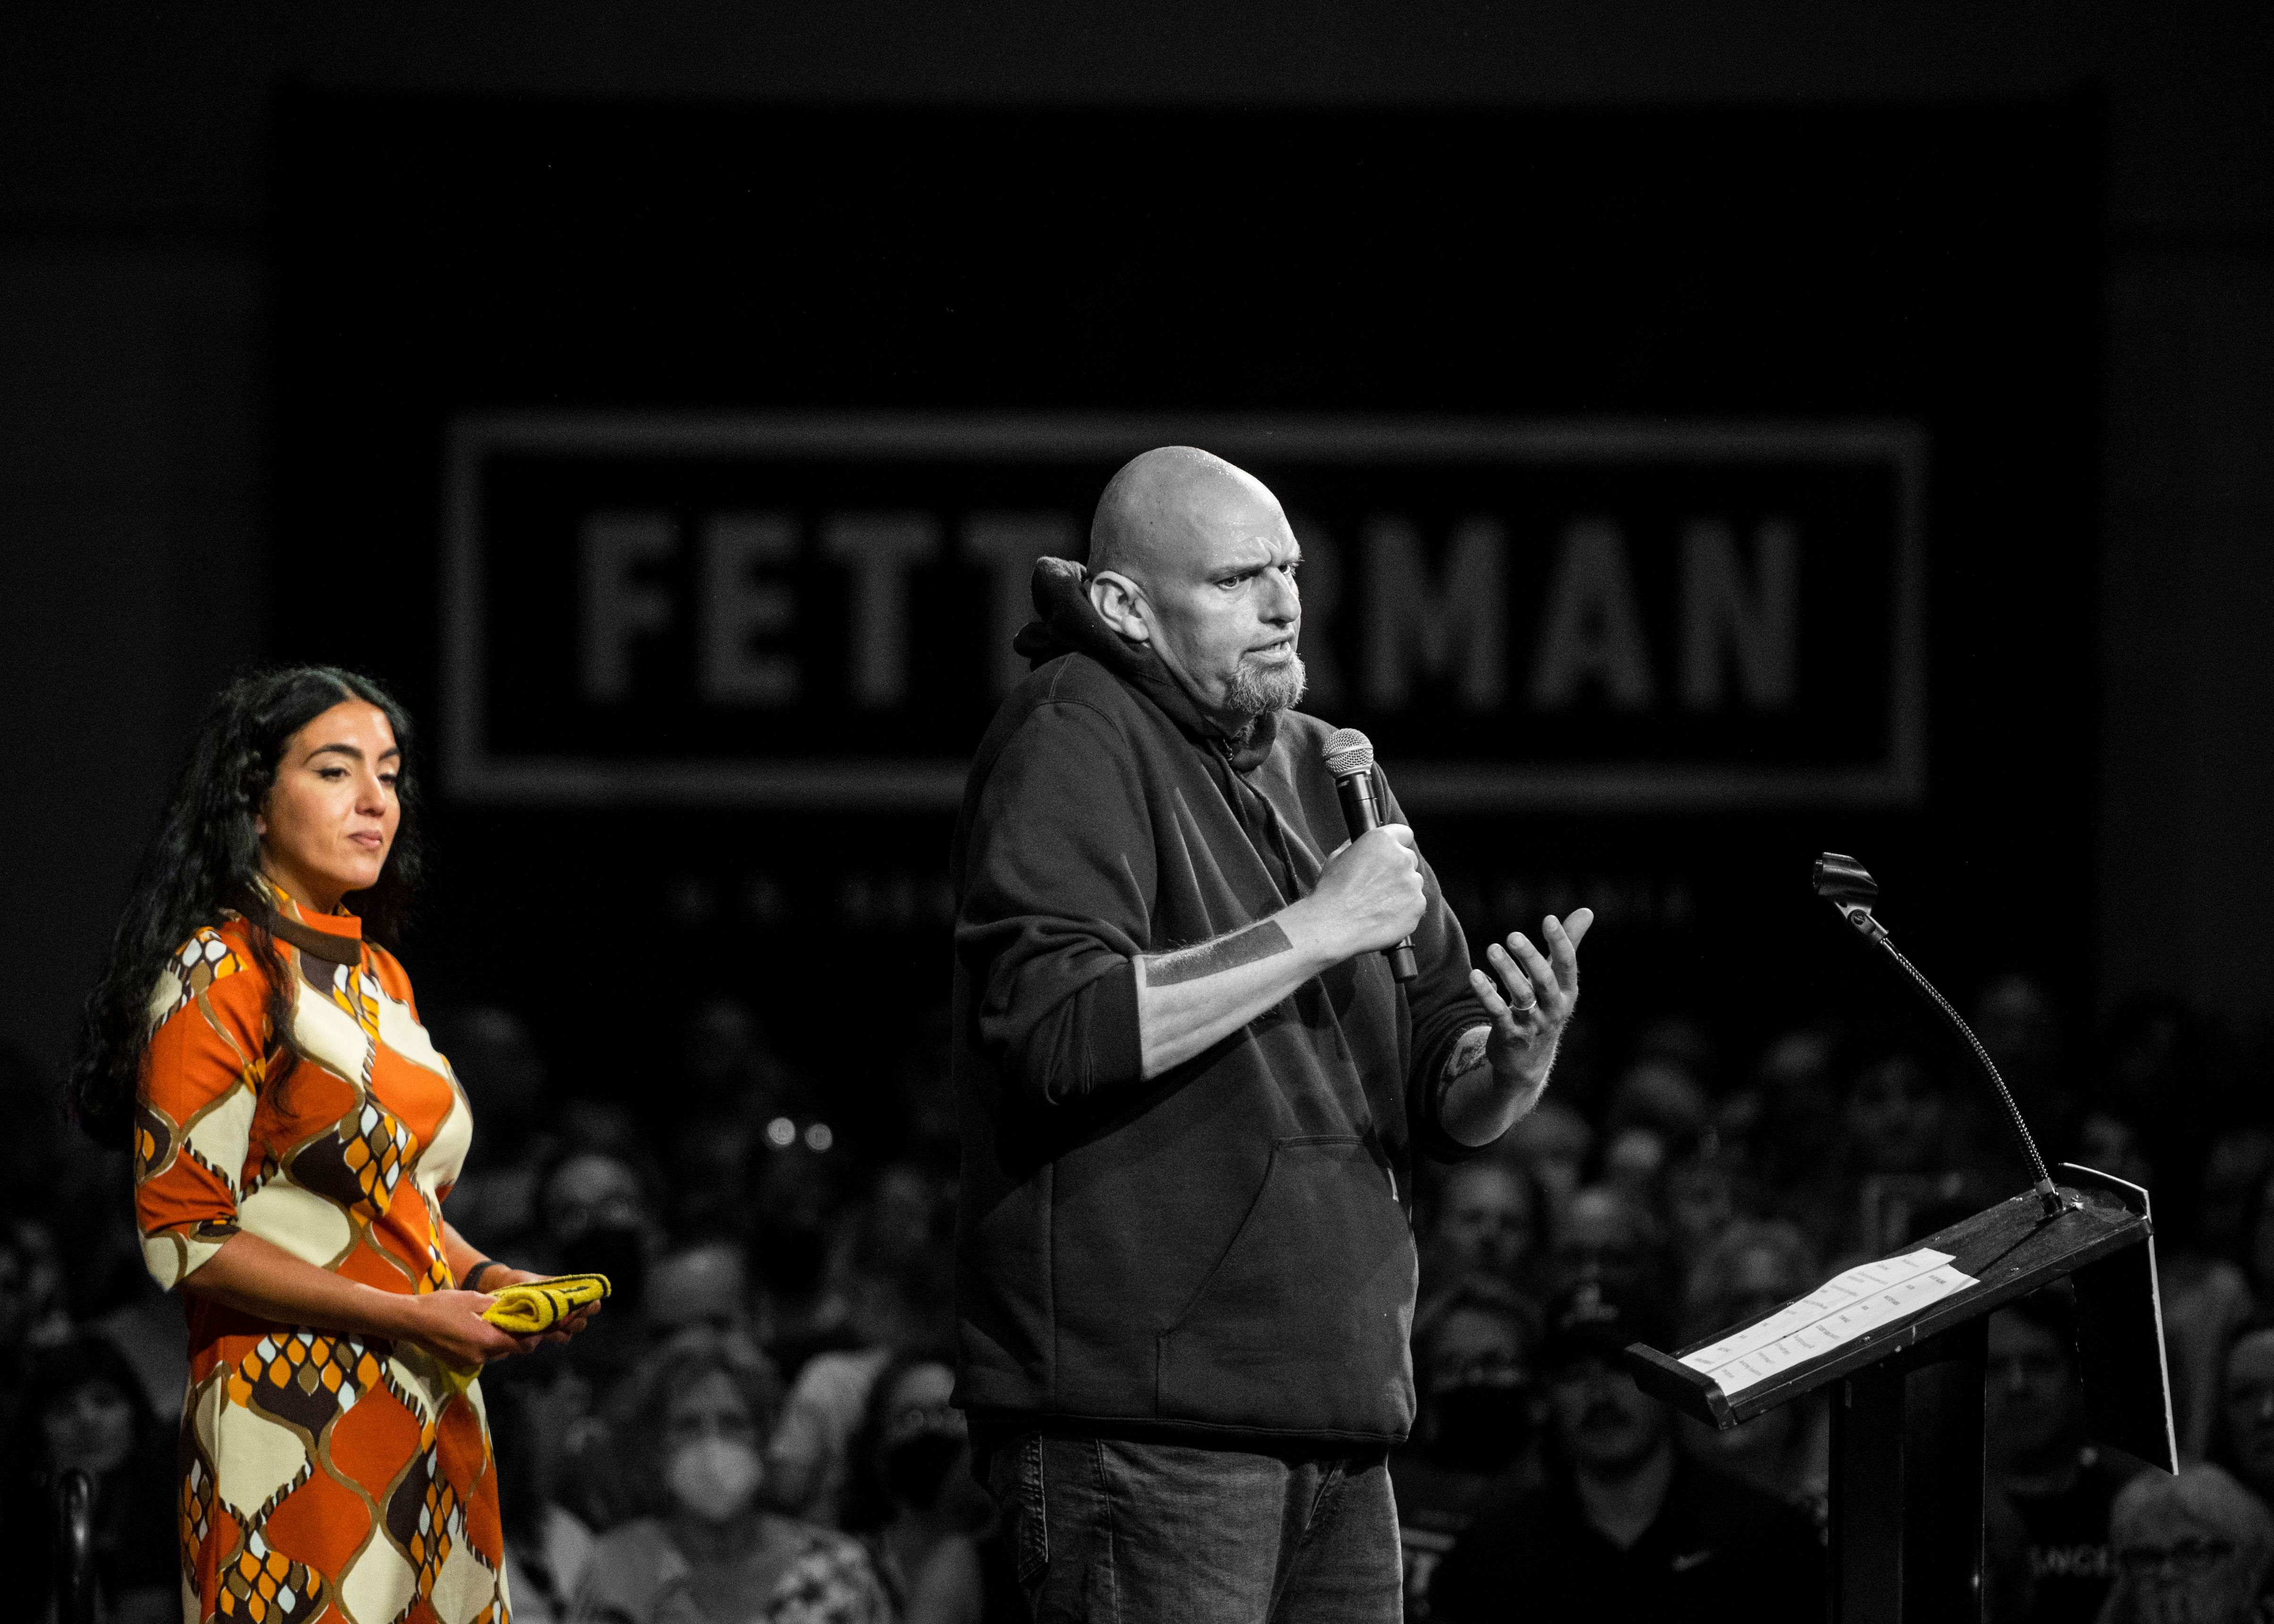 John Fetterman's height put him at risk for his heart condition, A-fib:  Taller women are especially susceptible